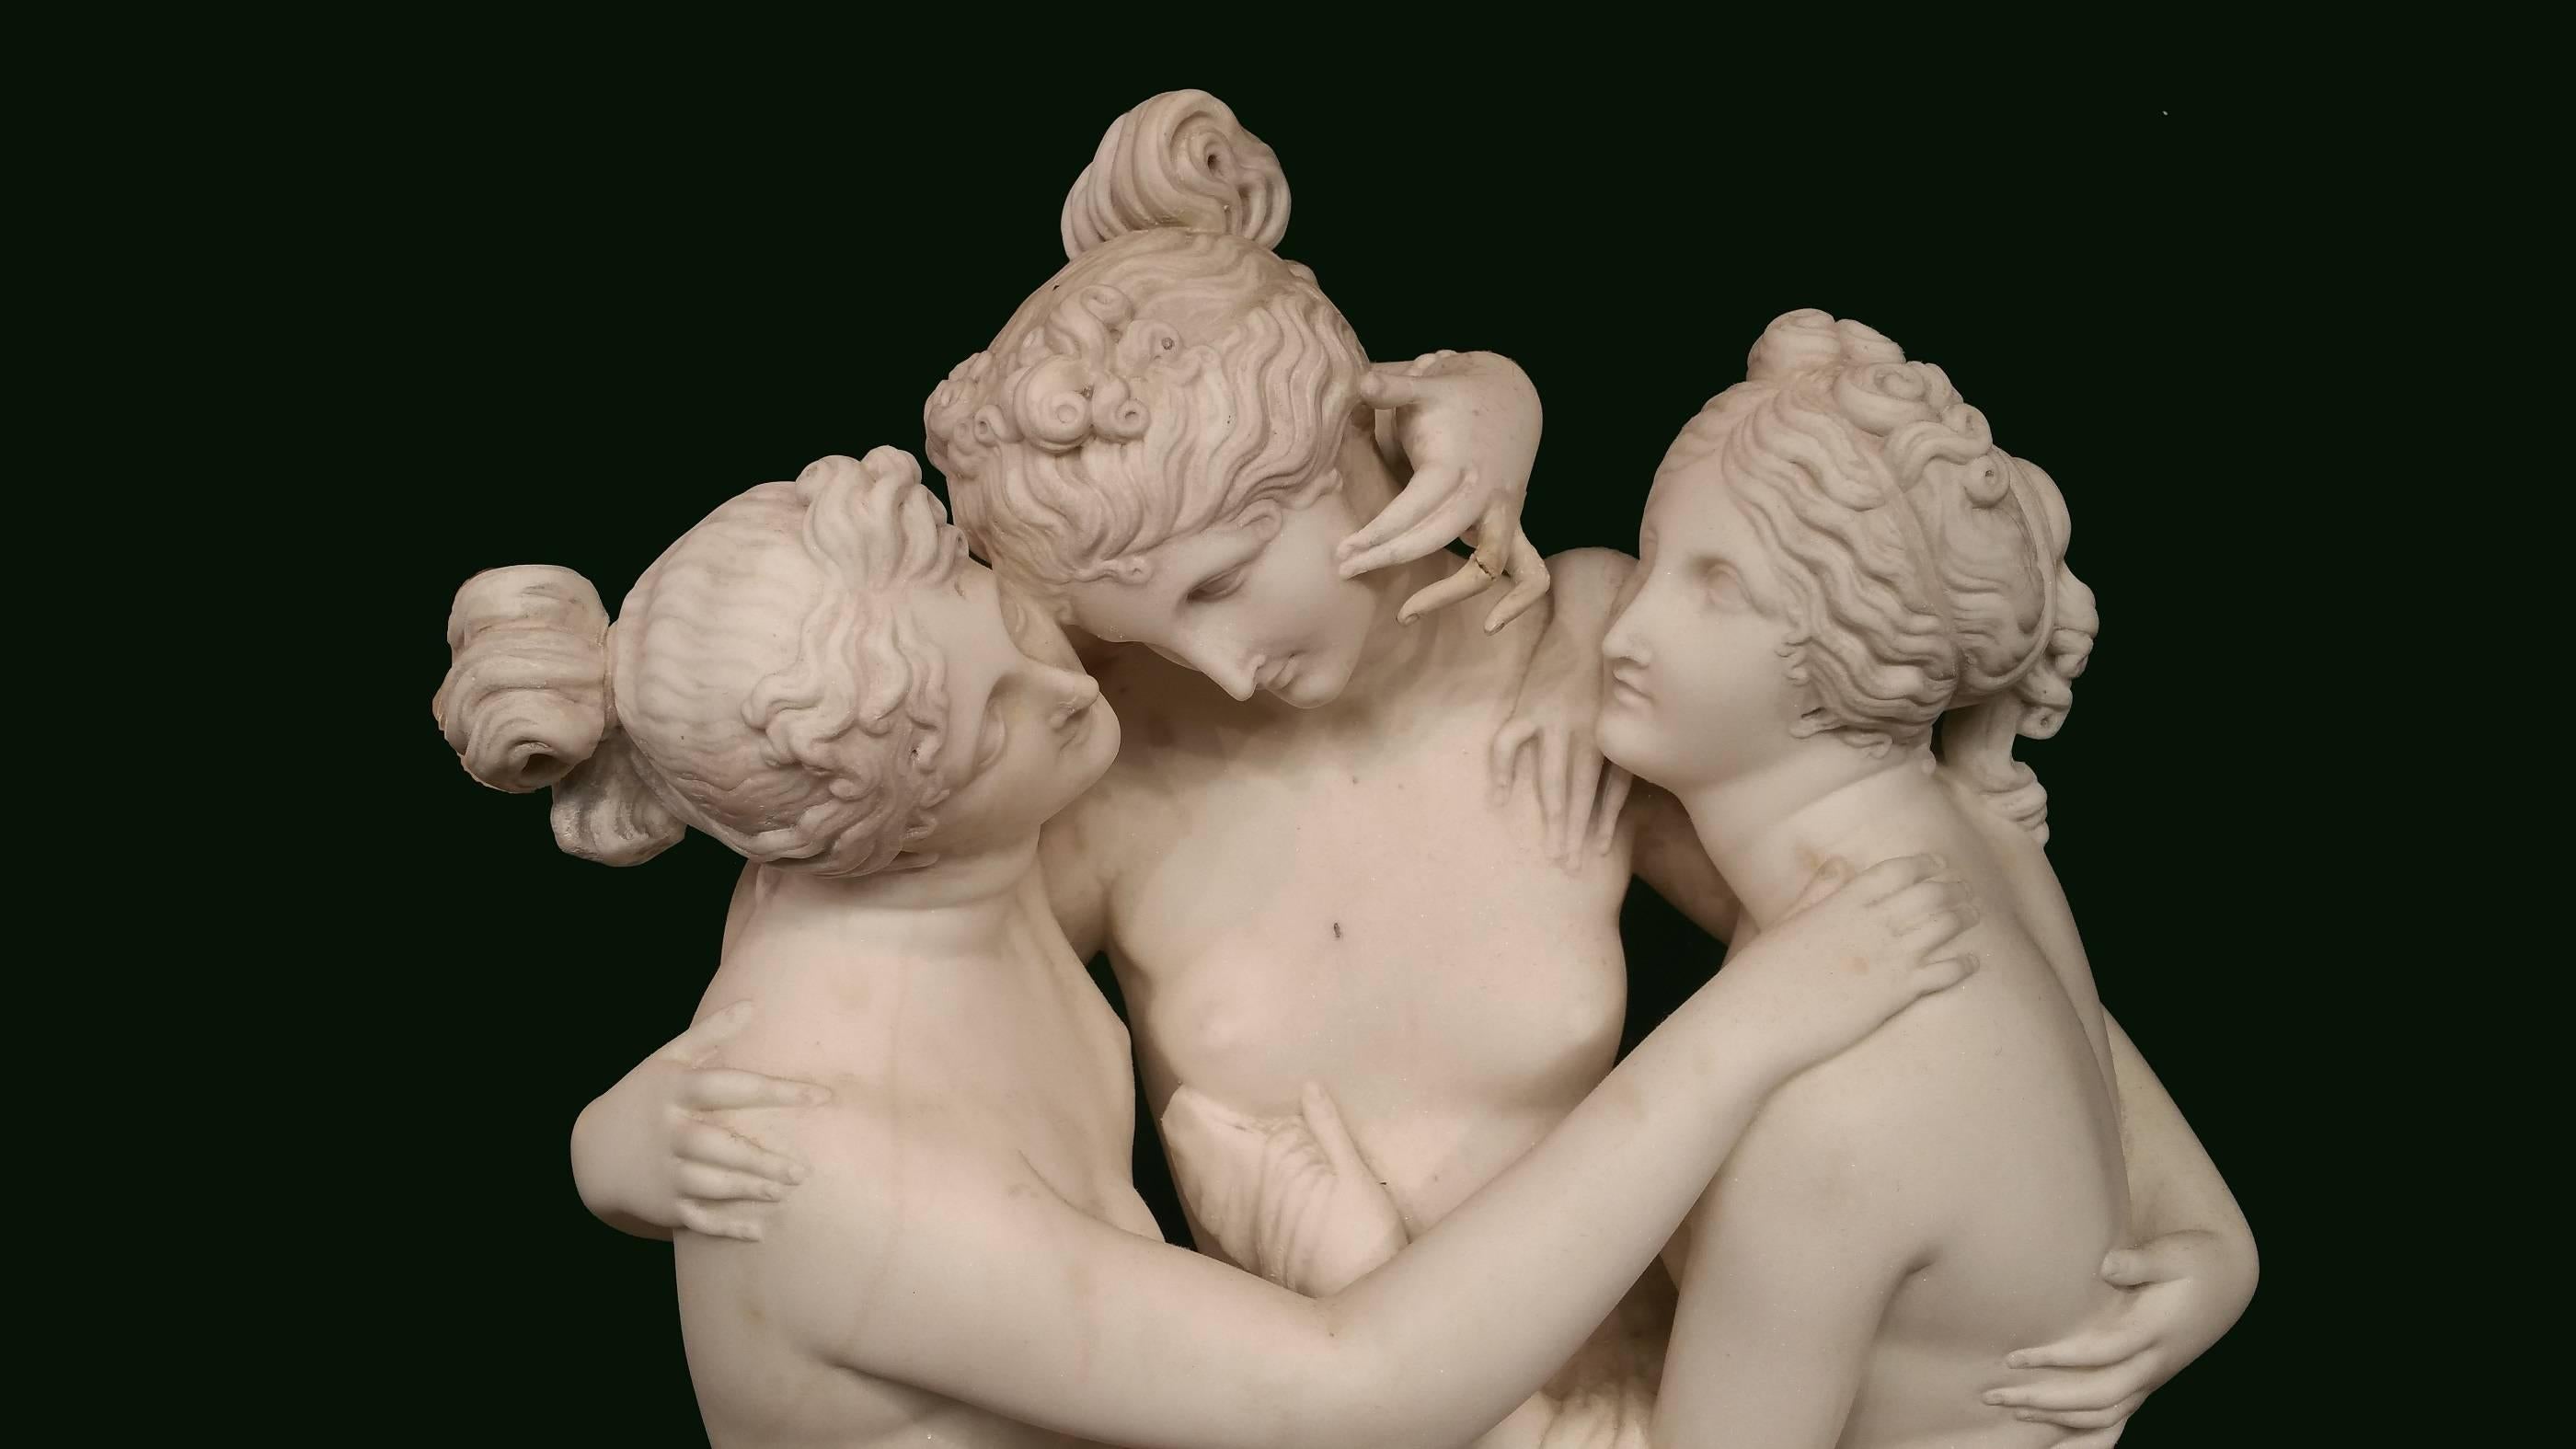 Three Graces - Brown Nude Sculpture by Marshal Wood